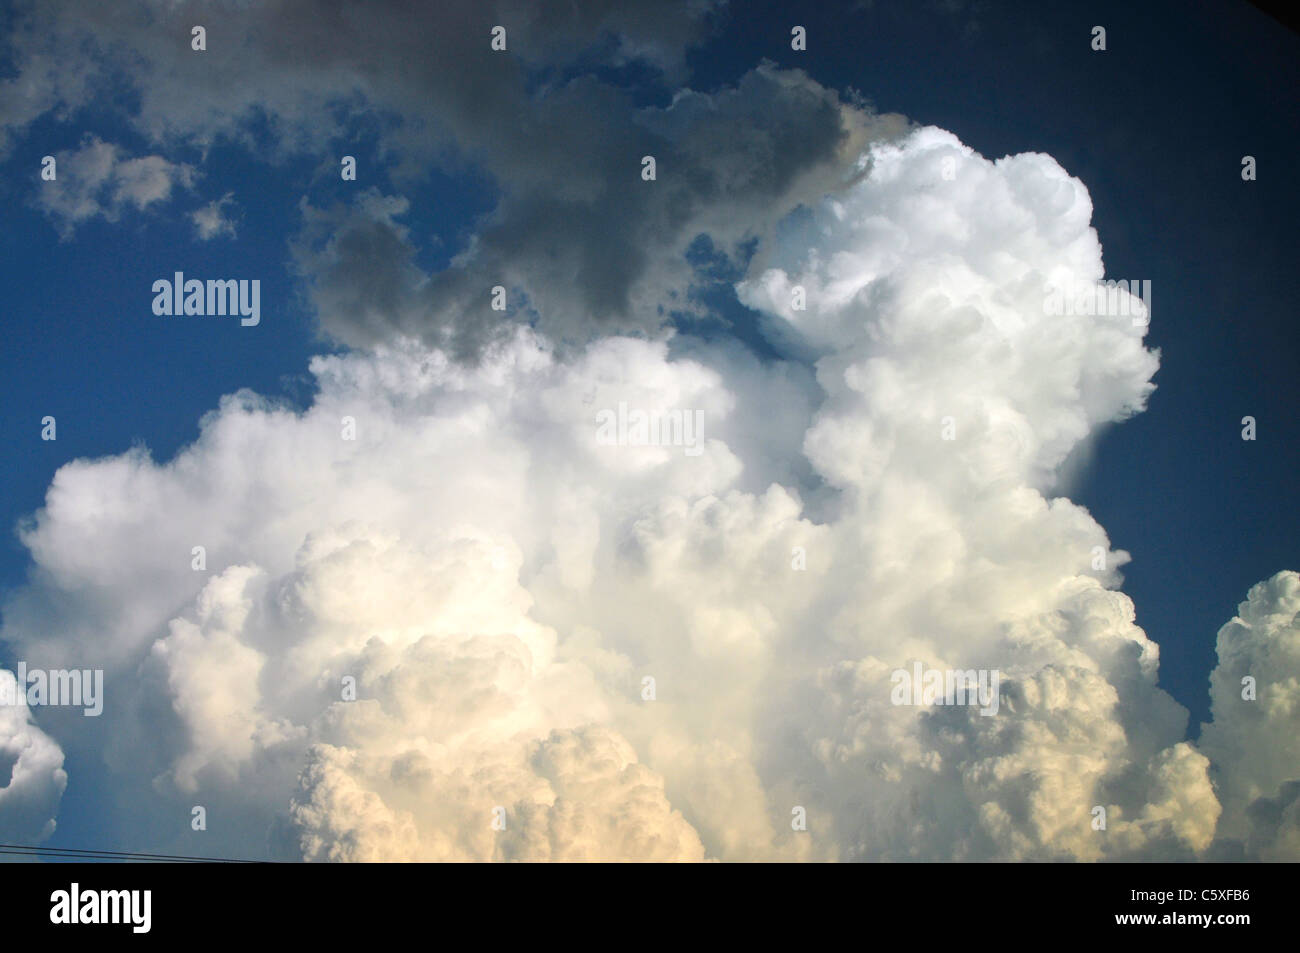 A Pileus Cloud formation in the sky. Stock Photo